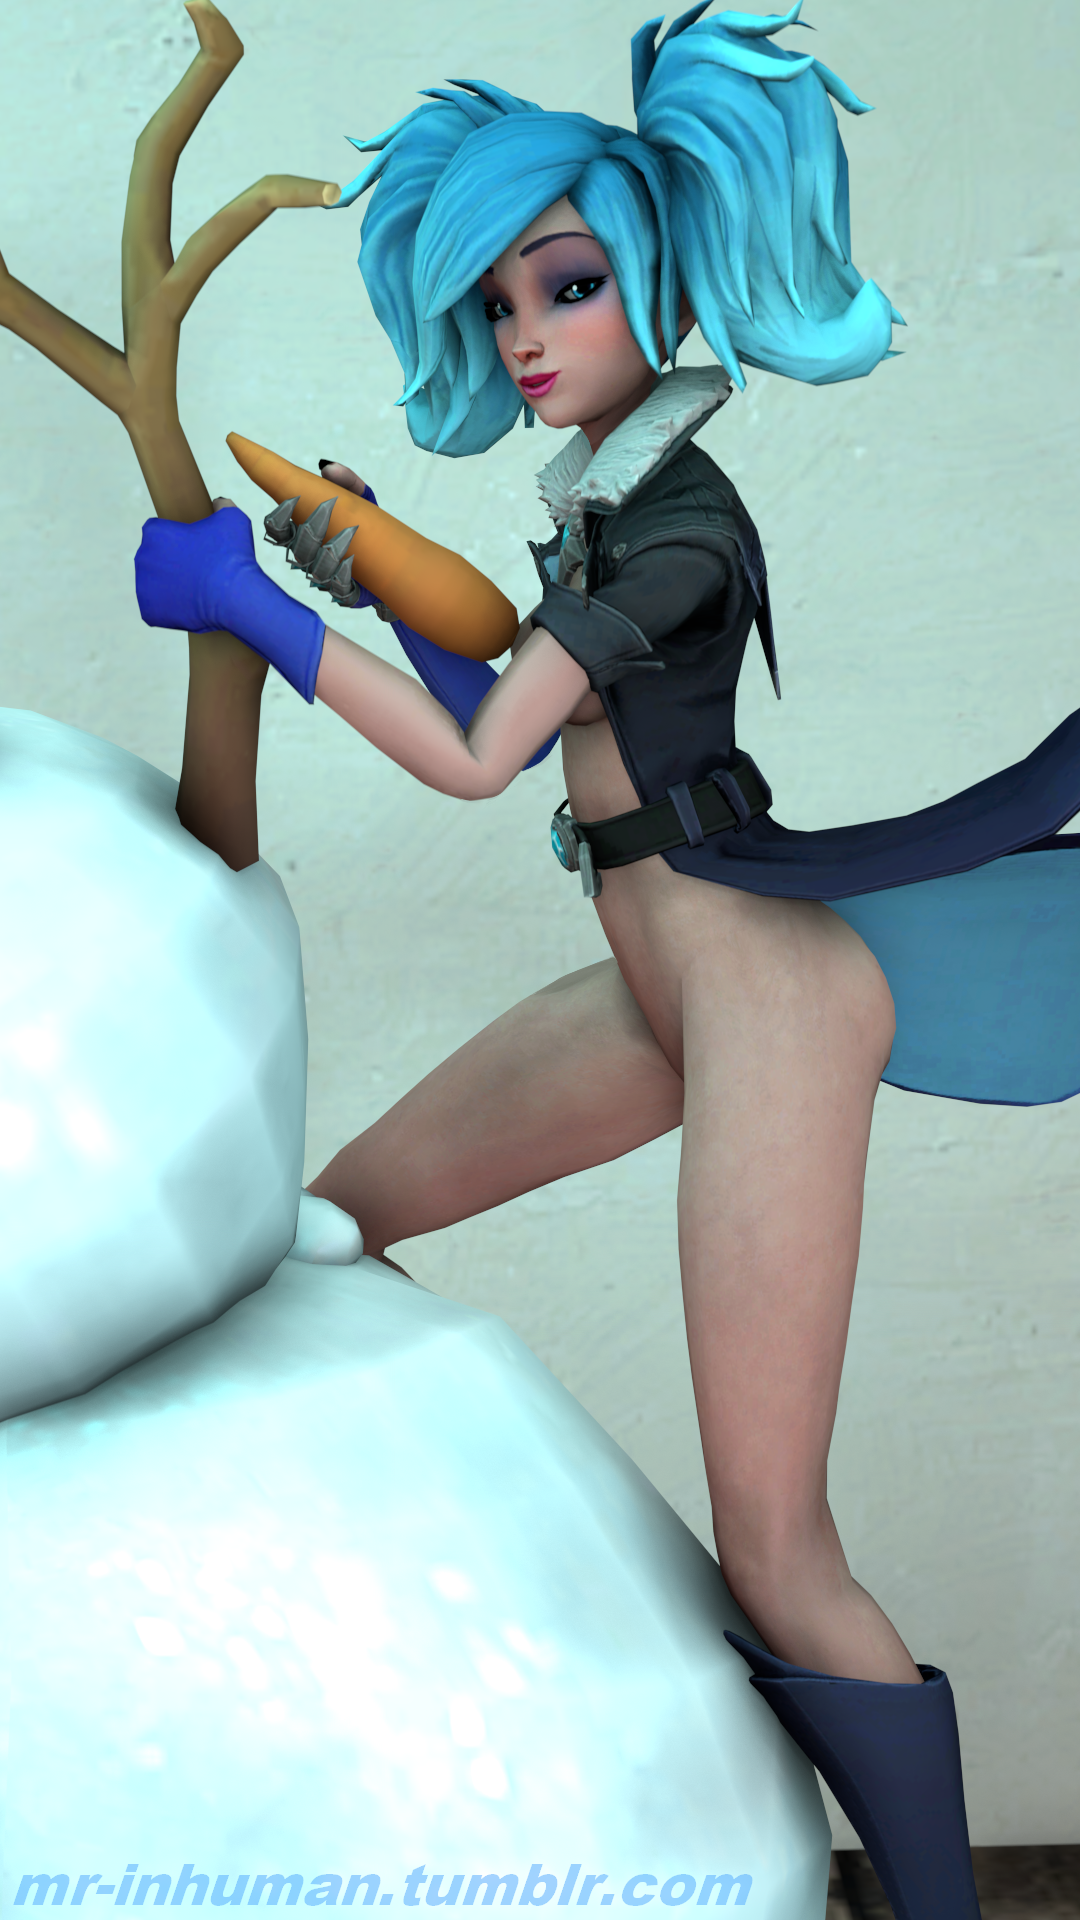 mr-inhuman:evie enjoying some time with a snowman.